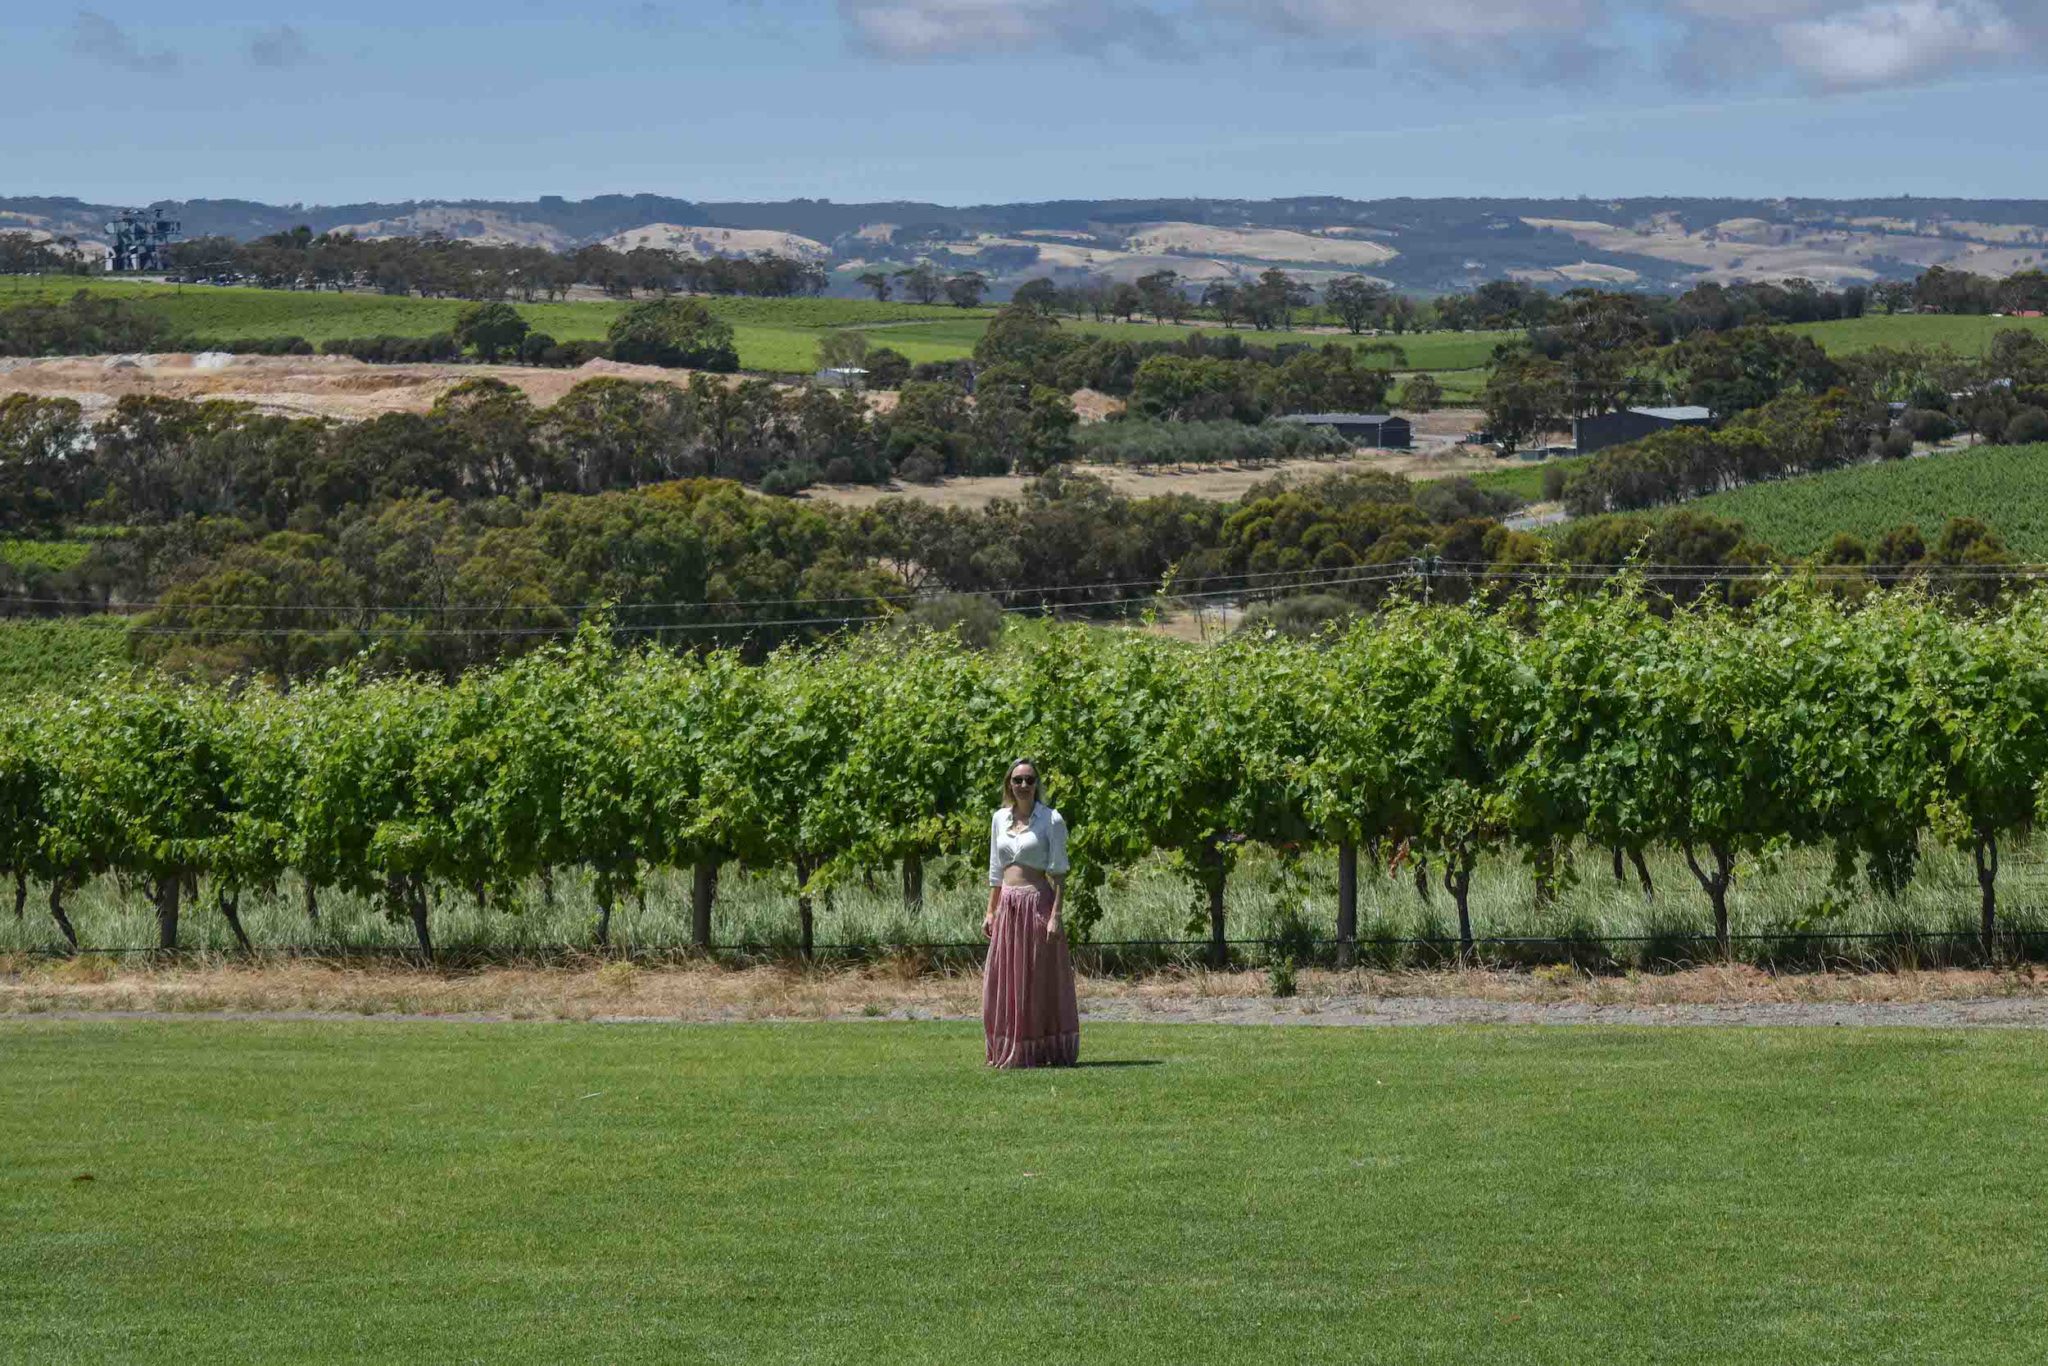 Hayley walking along the vines at Mollydooker winery in McLaren Vale 